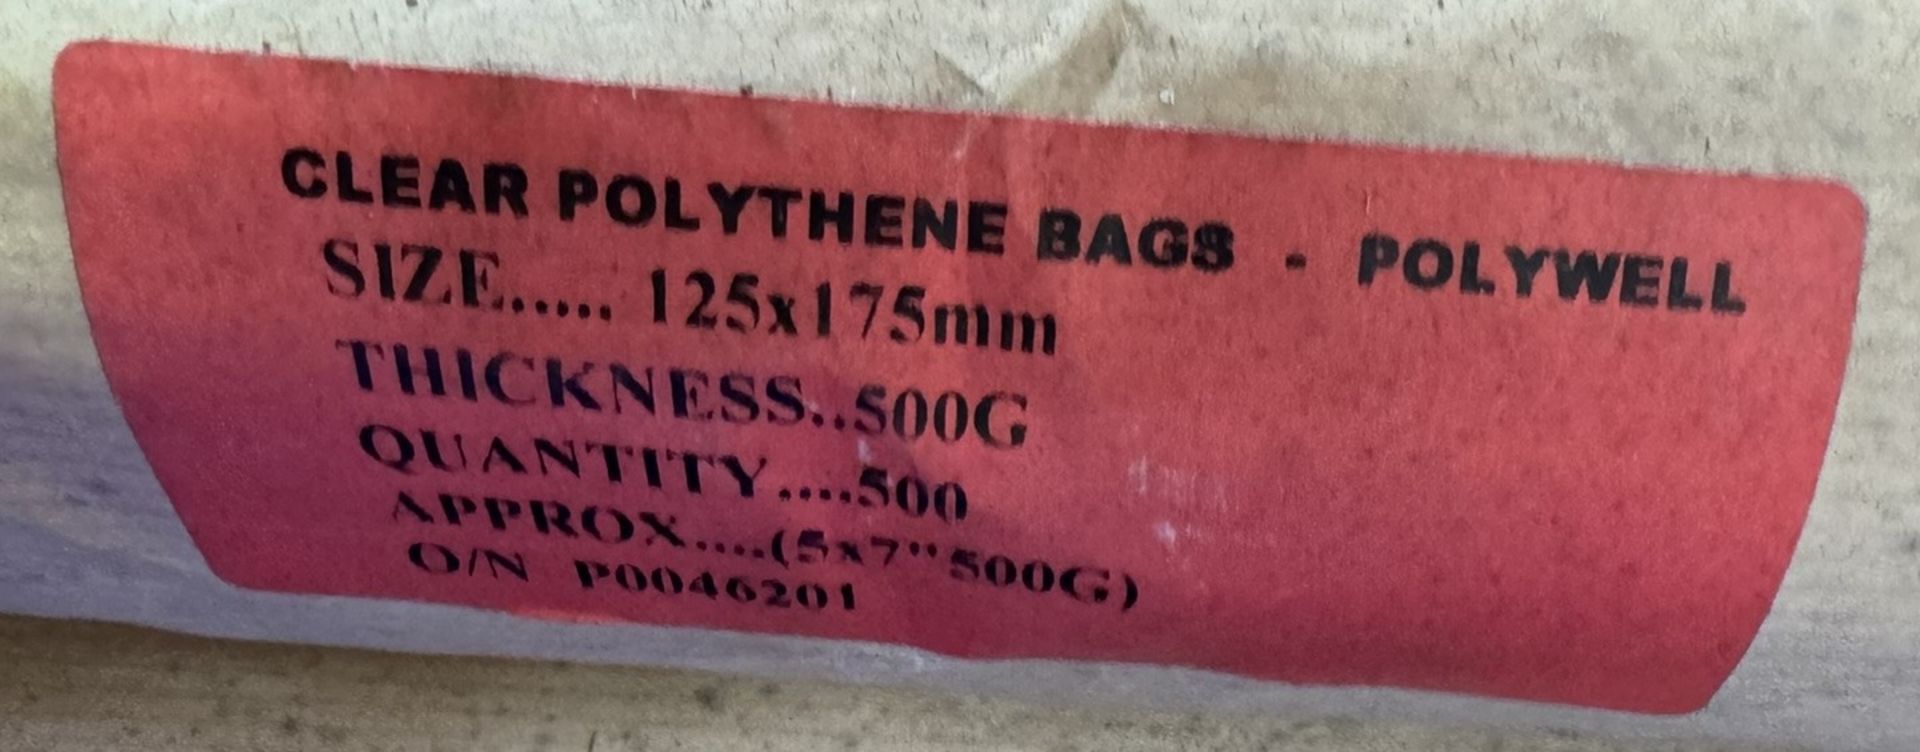 Approx 1,500 x Polywell Clear Polythene Bags - Image 2 of 2